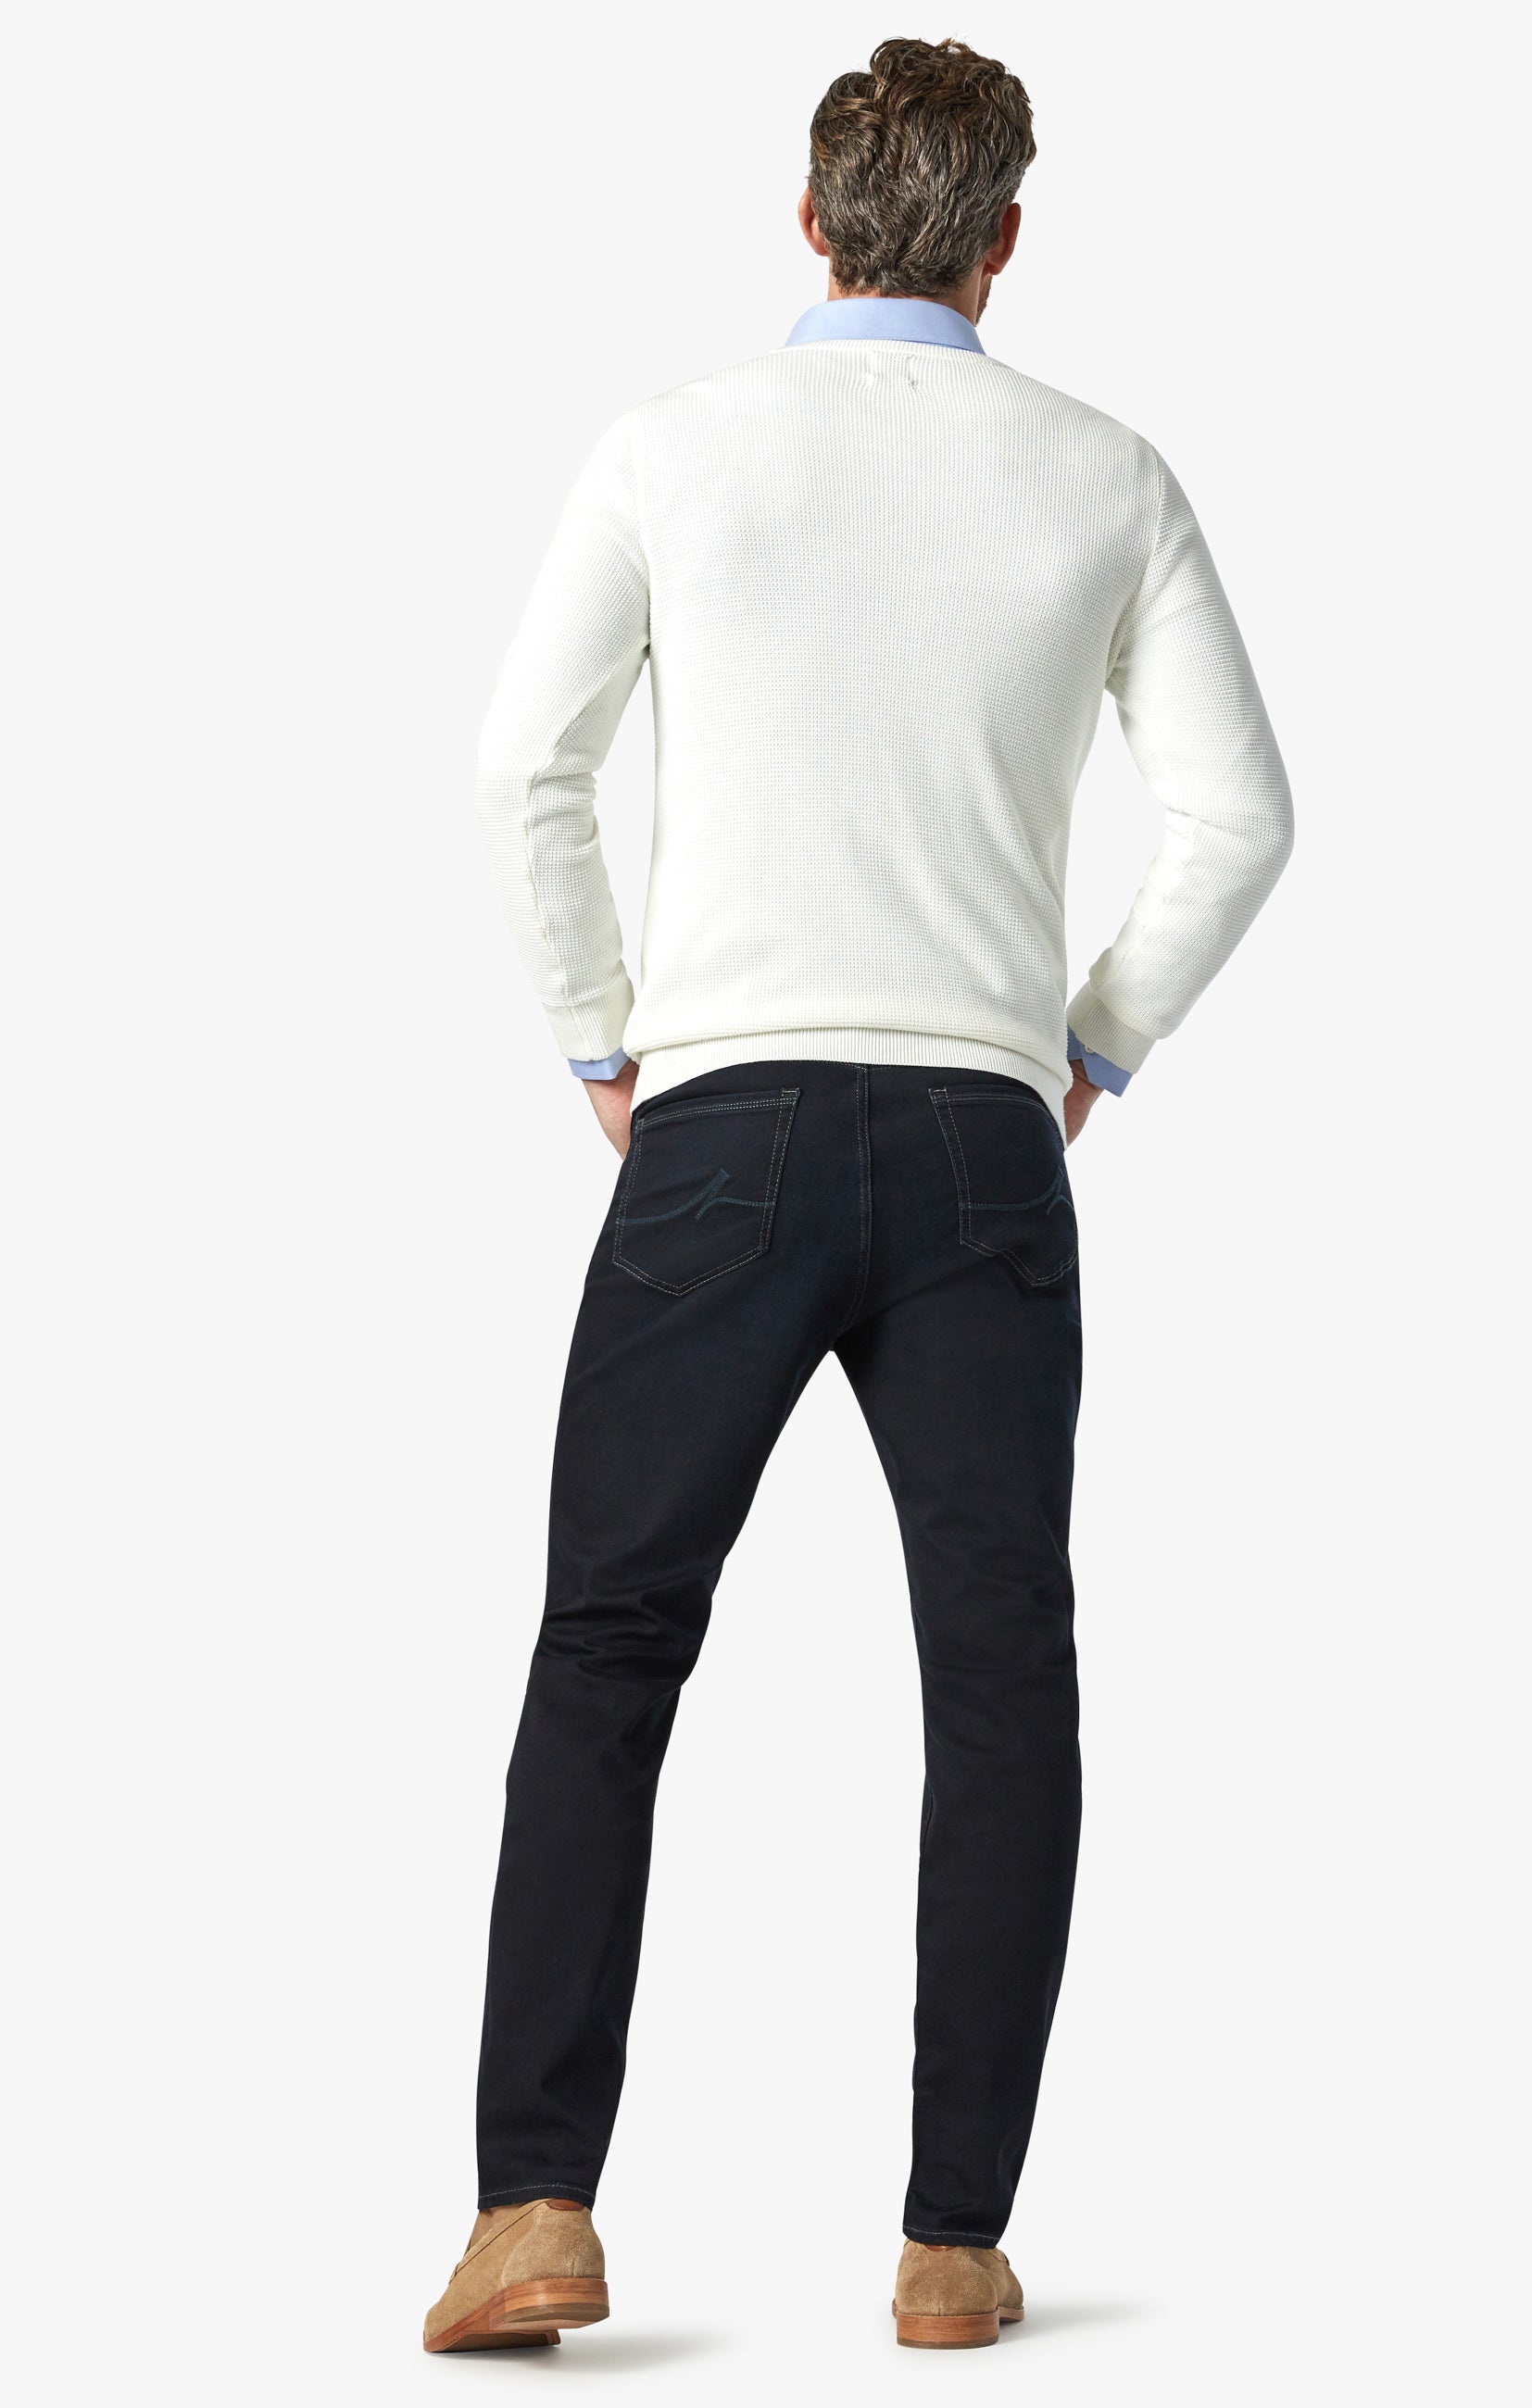 Champ Athletic Fit Jeans in Midnight Austin